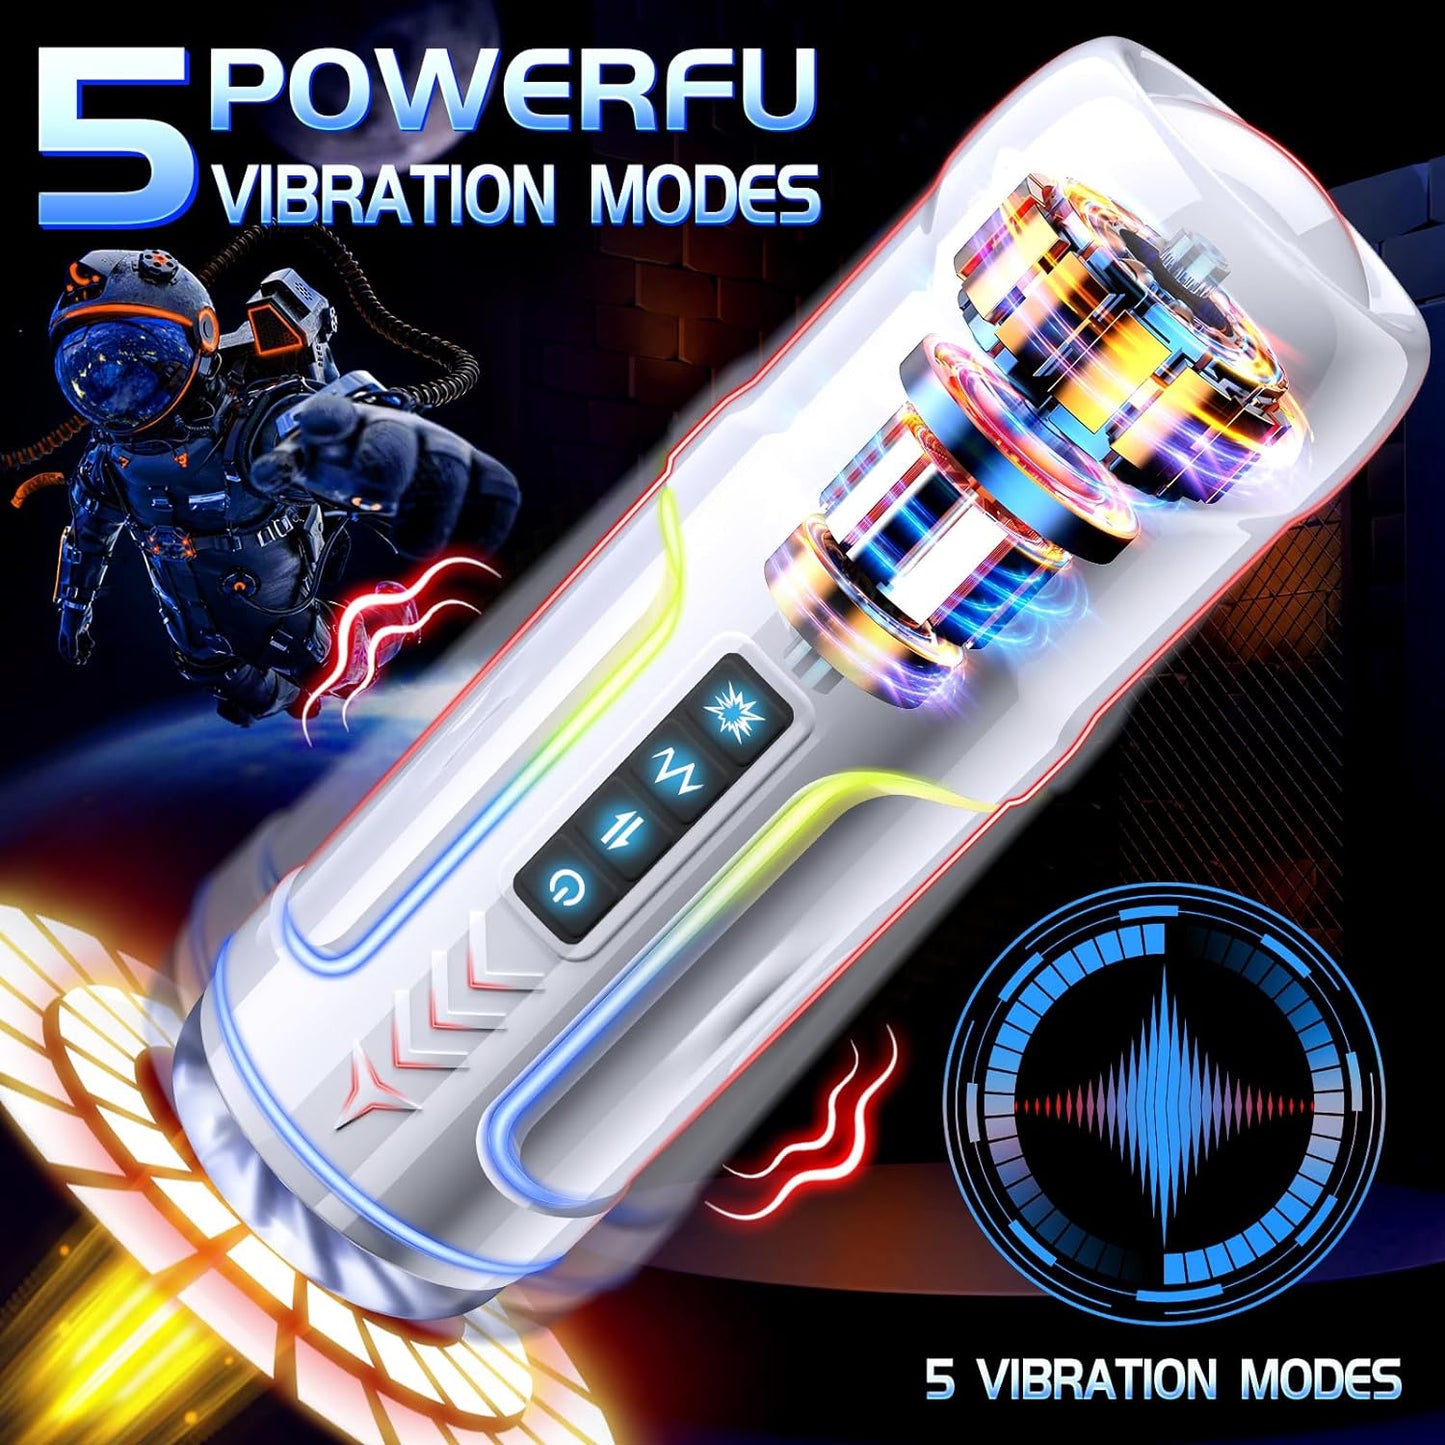 Male Masturbators Sex Toys - Adult Toys for Men: Penis Pump Stroker Pocket Pussy with 5 Thrusting and 5 Vibrating Functions. This Male Masturbator Penis Vibrator, also known as a Blowjob Machine, offers ultimate pleasure and satisfaction